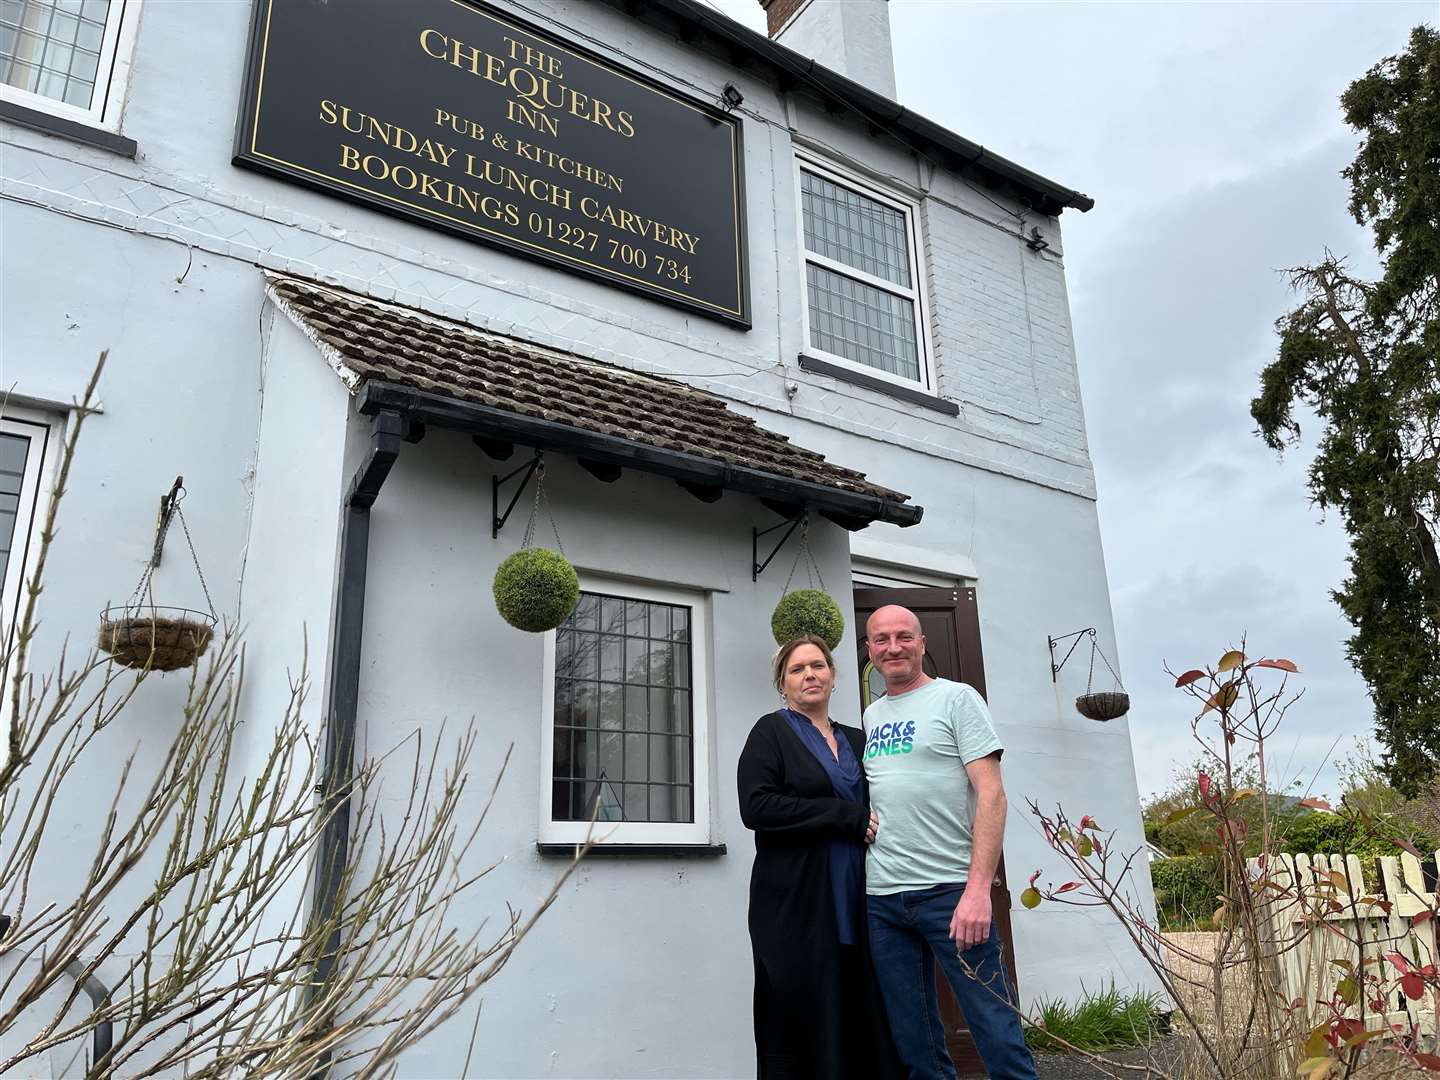 Steve McHugh and Paula Gilbert, new owners of The Chequers